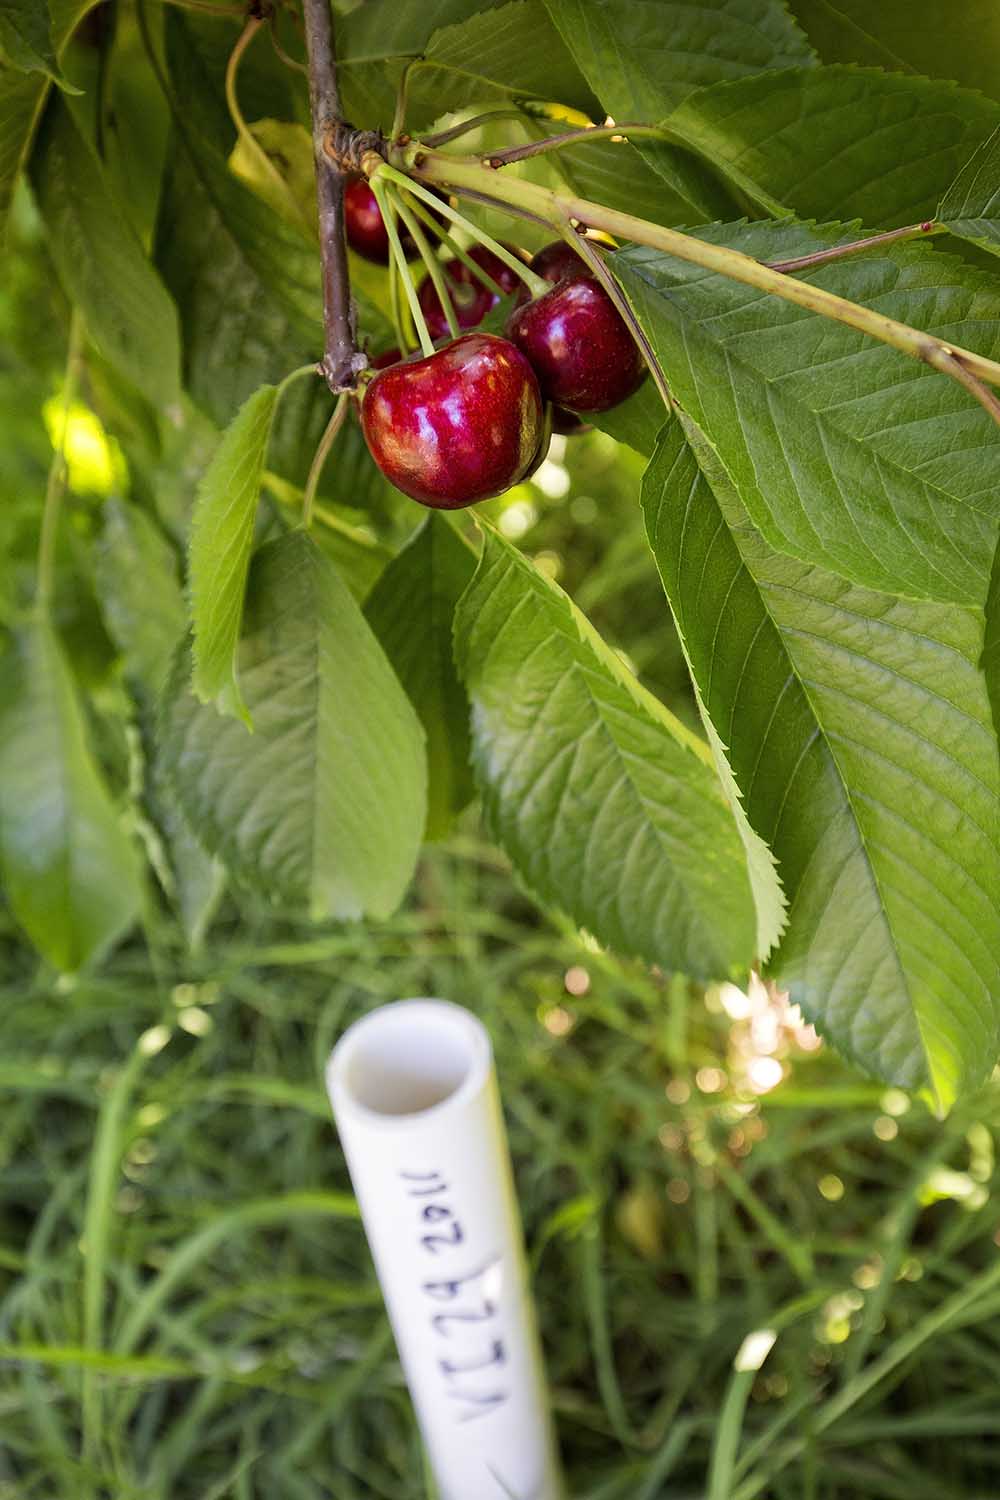 The mother plant of a new cherry variety, Tamara cv. Aramat, shown six days from harvest on July 5, 2017, was planted in The Dalles, Oregon, in 2011 and listed as V129 on the marker below. The cherry, out of the Czech Republic, is noted as a very large, mid to late season cherry that ripens before Skeena. <b>(TJ Mullinax/Good Fruit Grower)</b>